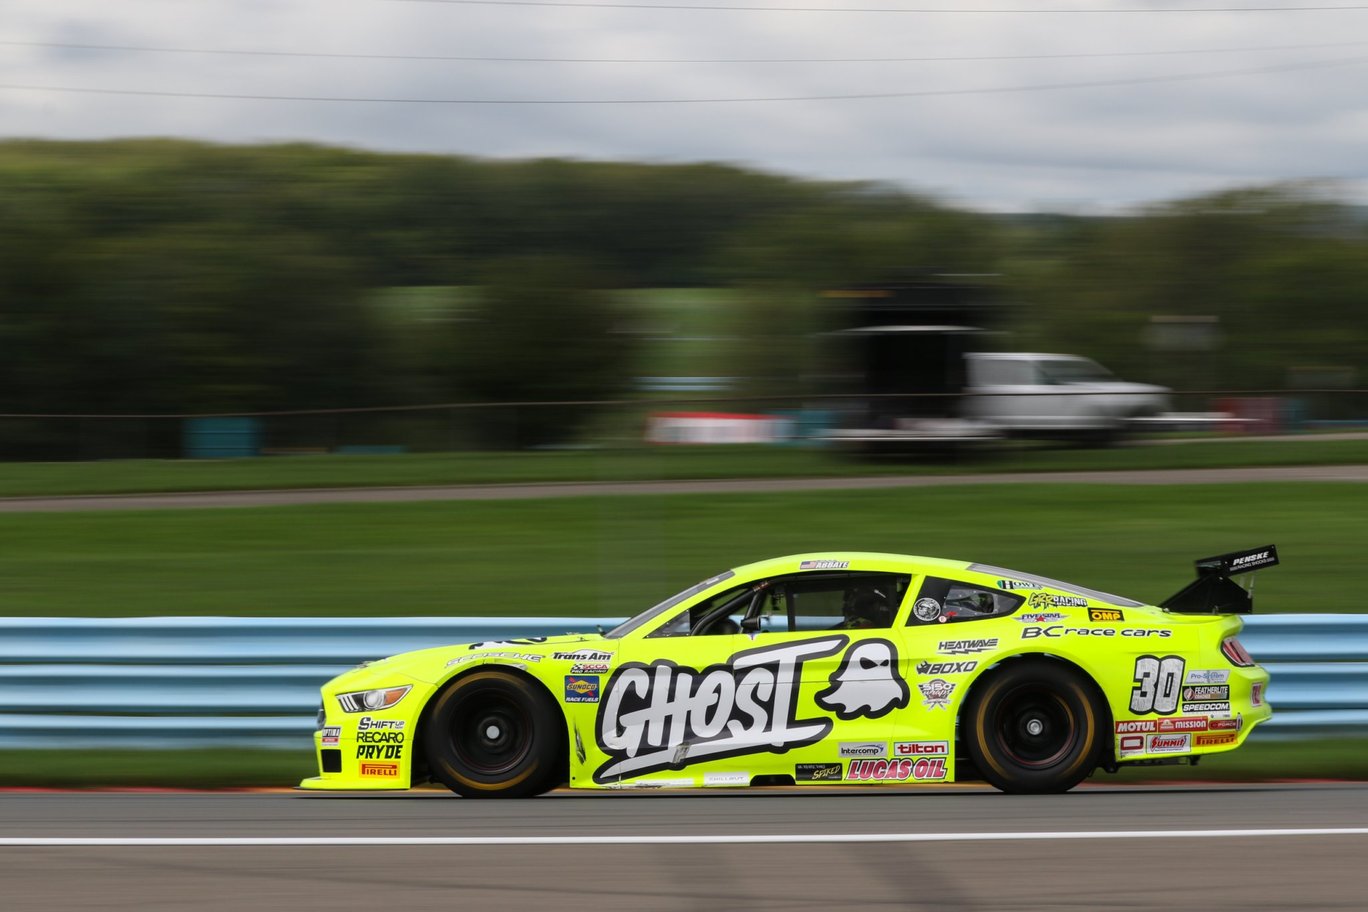 #30 Ghost Energy Ford Mustang TA2 Racecar Driven by Michele Abbate